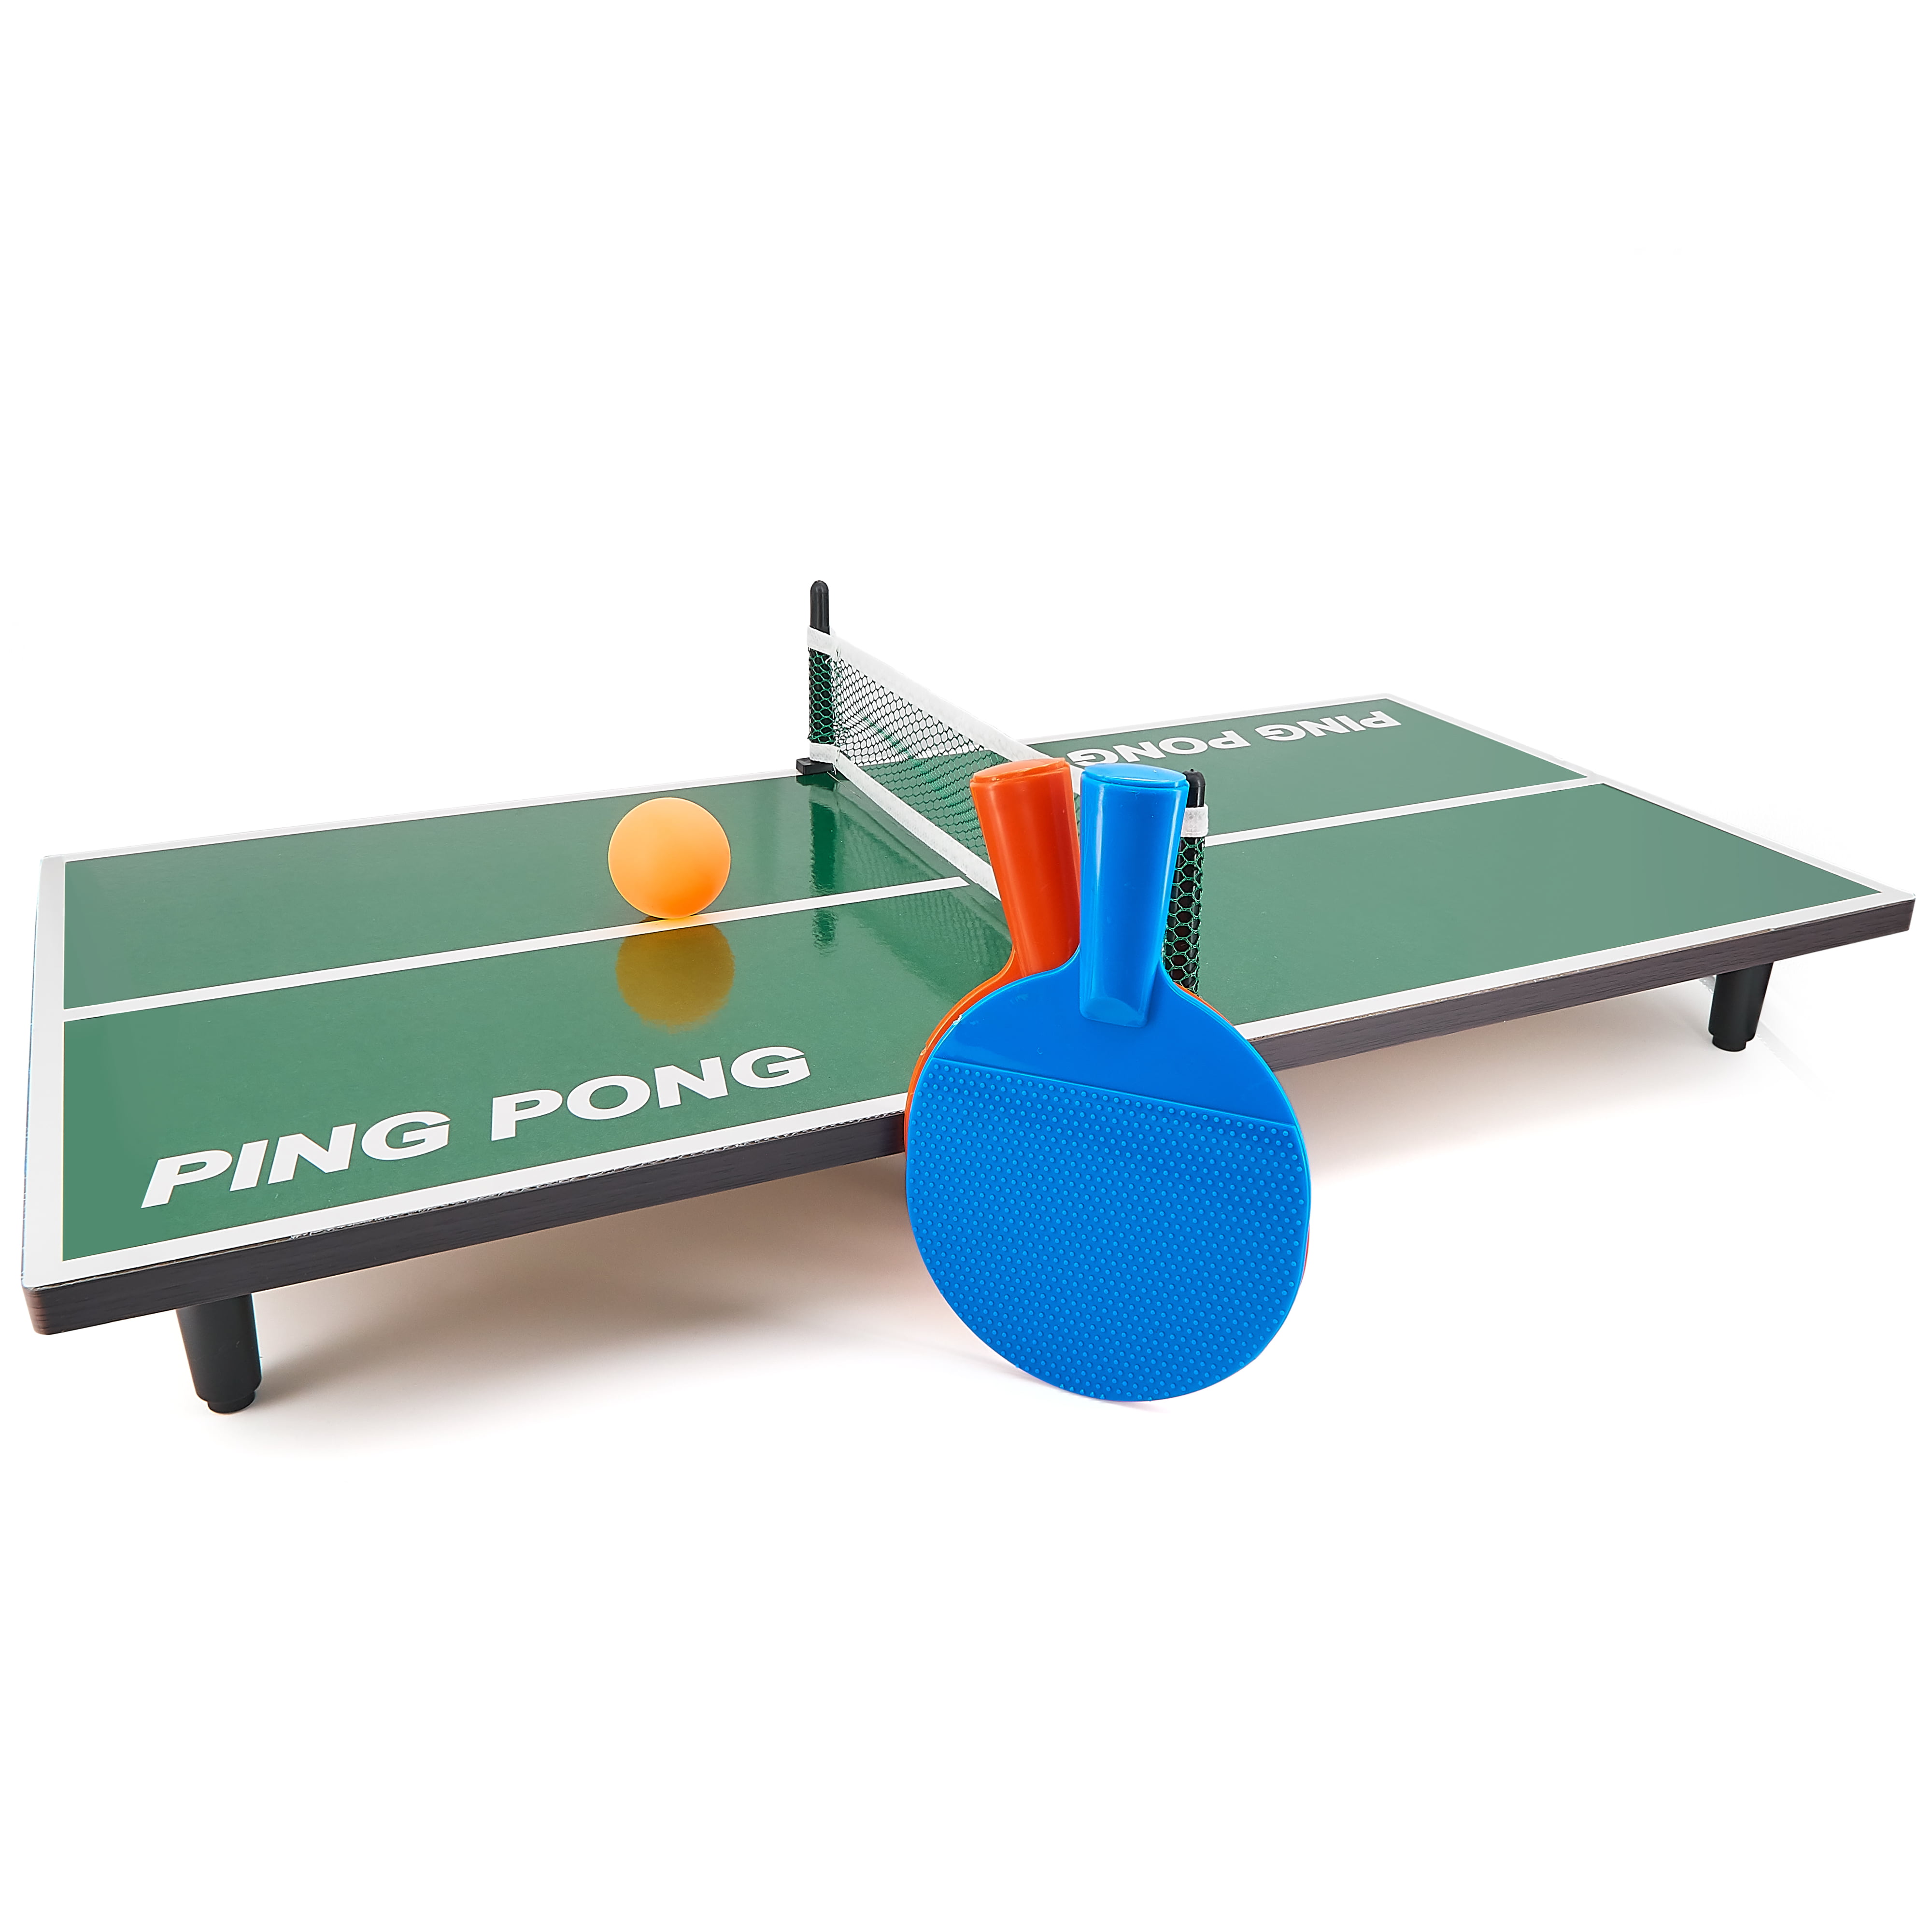 New Beautiful Kids Table Tennis Set Provide Your Kids with Hour of Fun N-21 